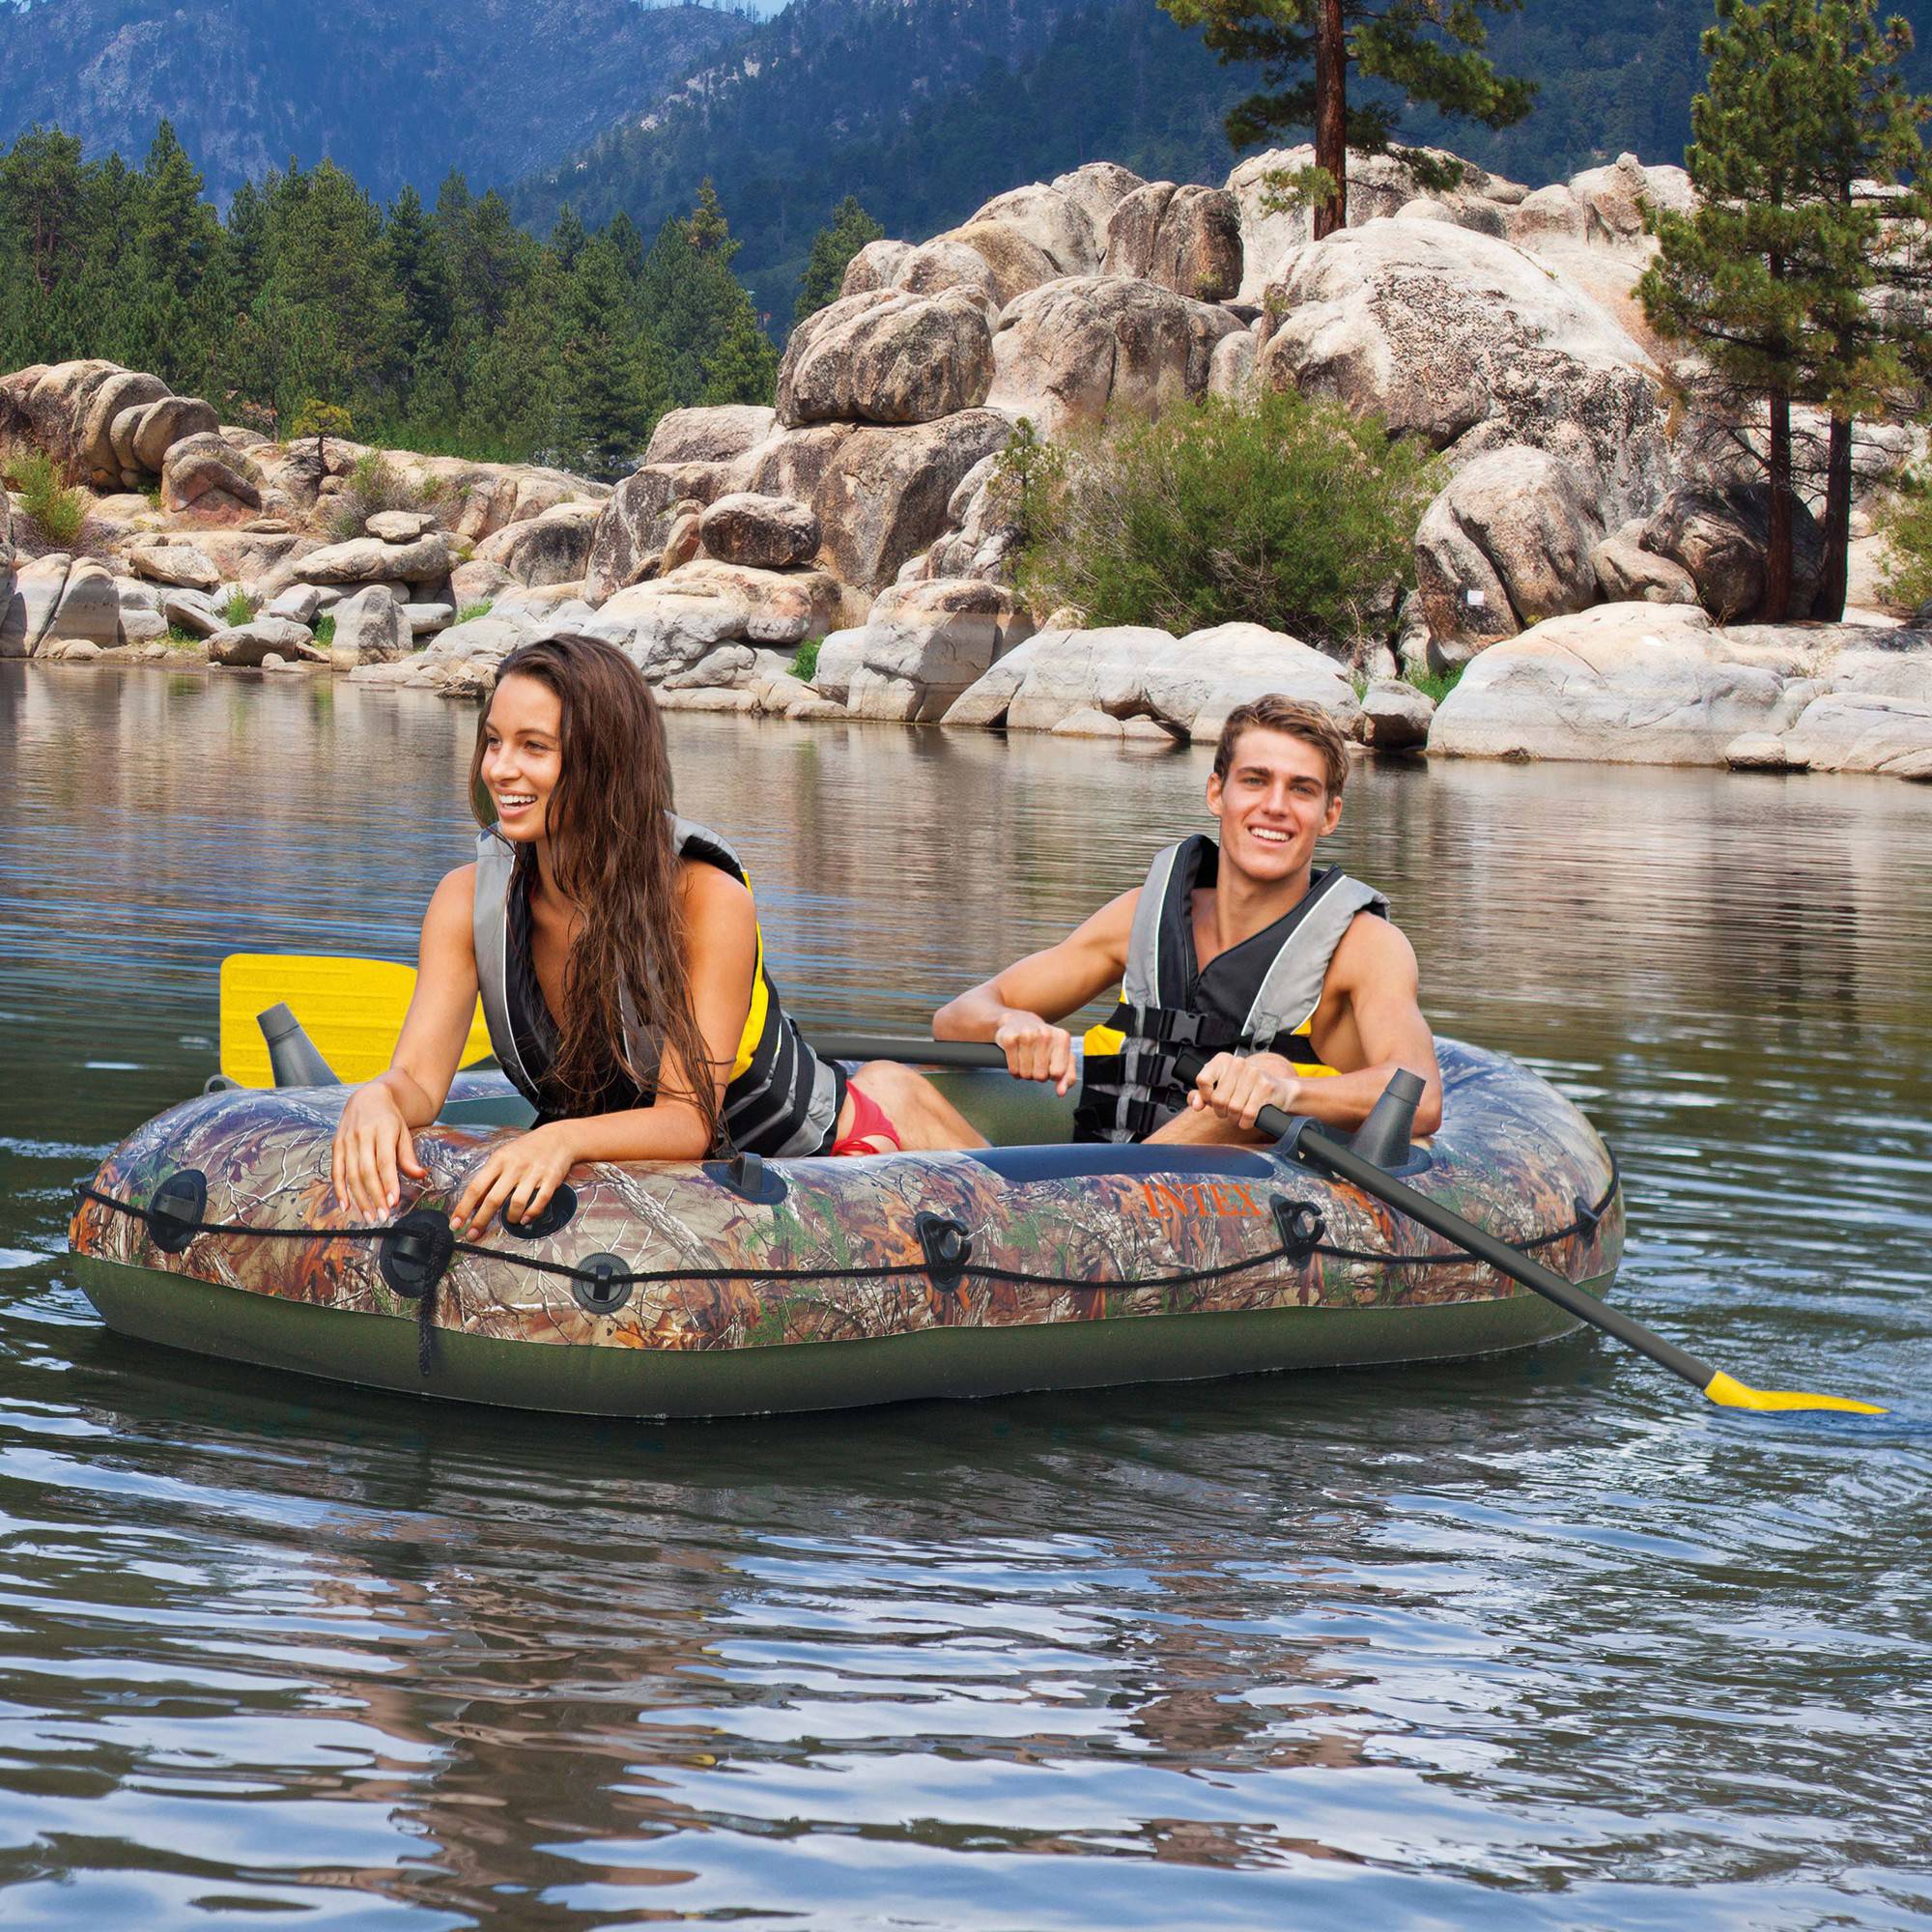 Intex Inflatable Realtree Seahawk 2 Two-Person Boat with Oars and Pump - image 2 of 2